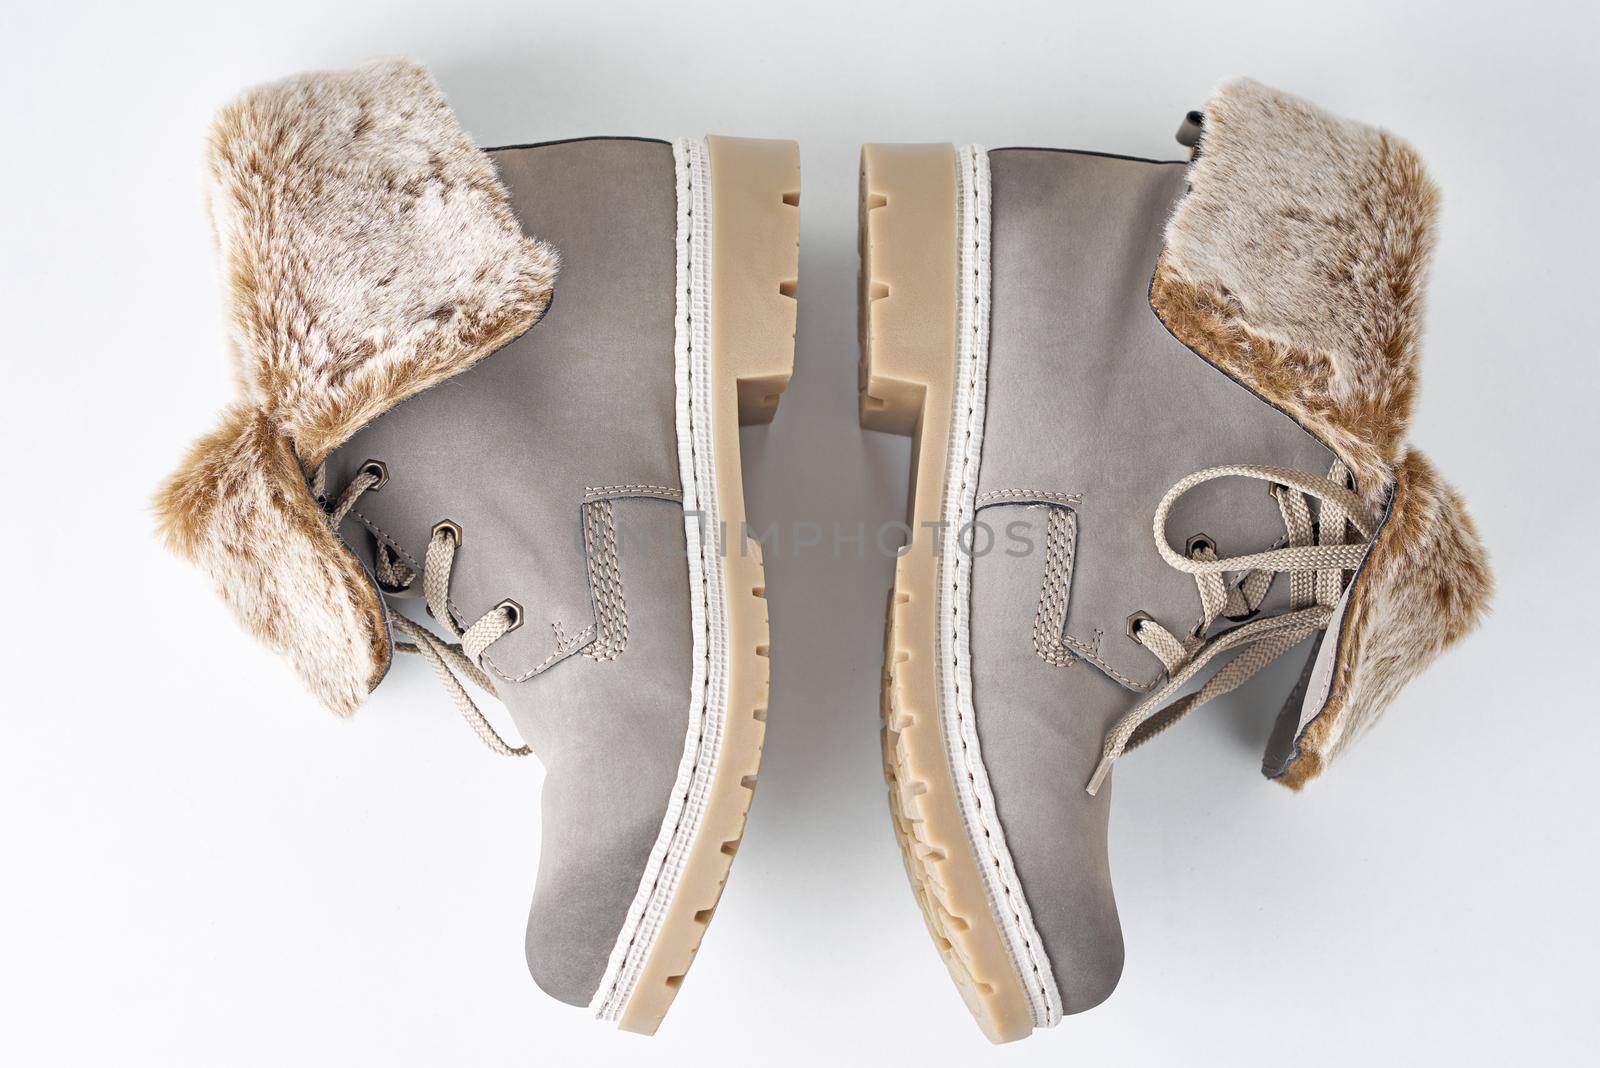 Pair of winter womens boots on the white background isolated, top view by Lazy_Bear